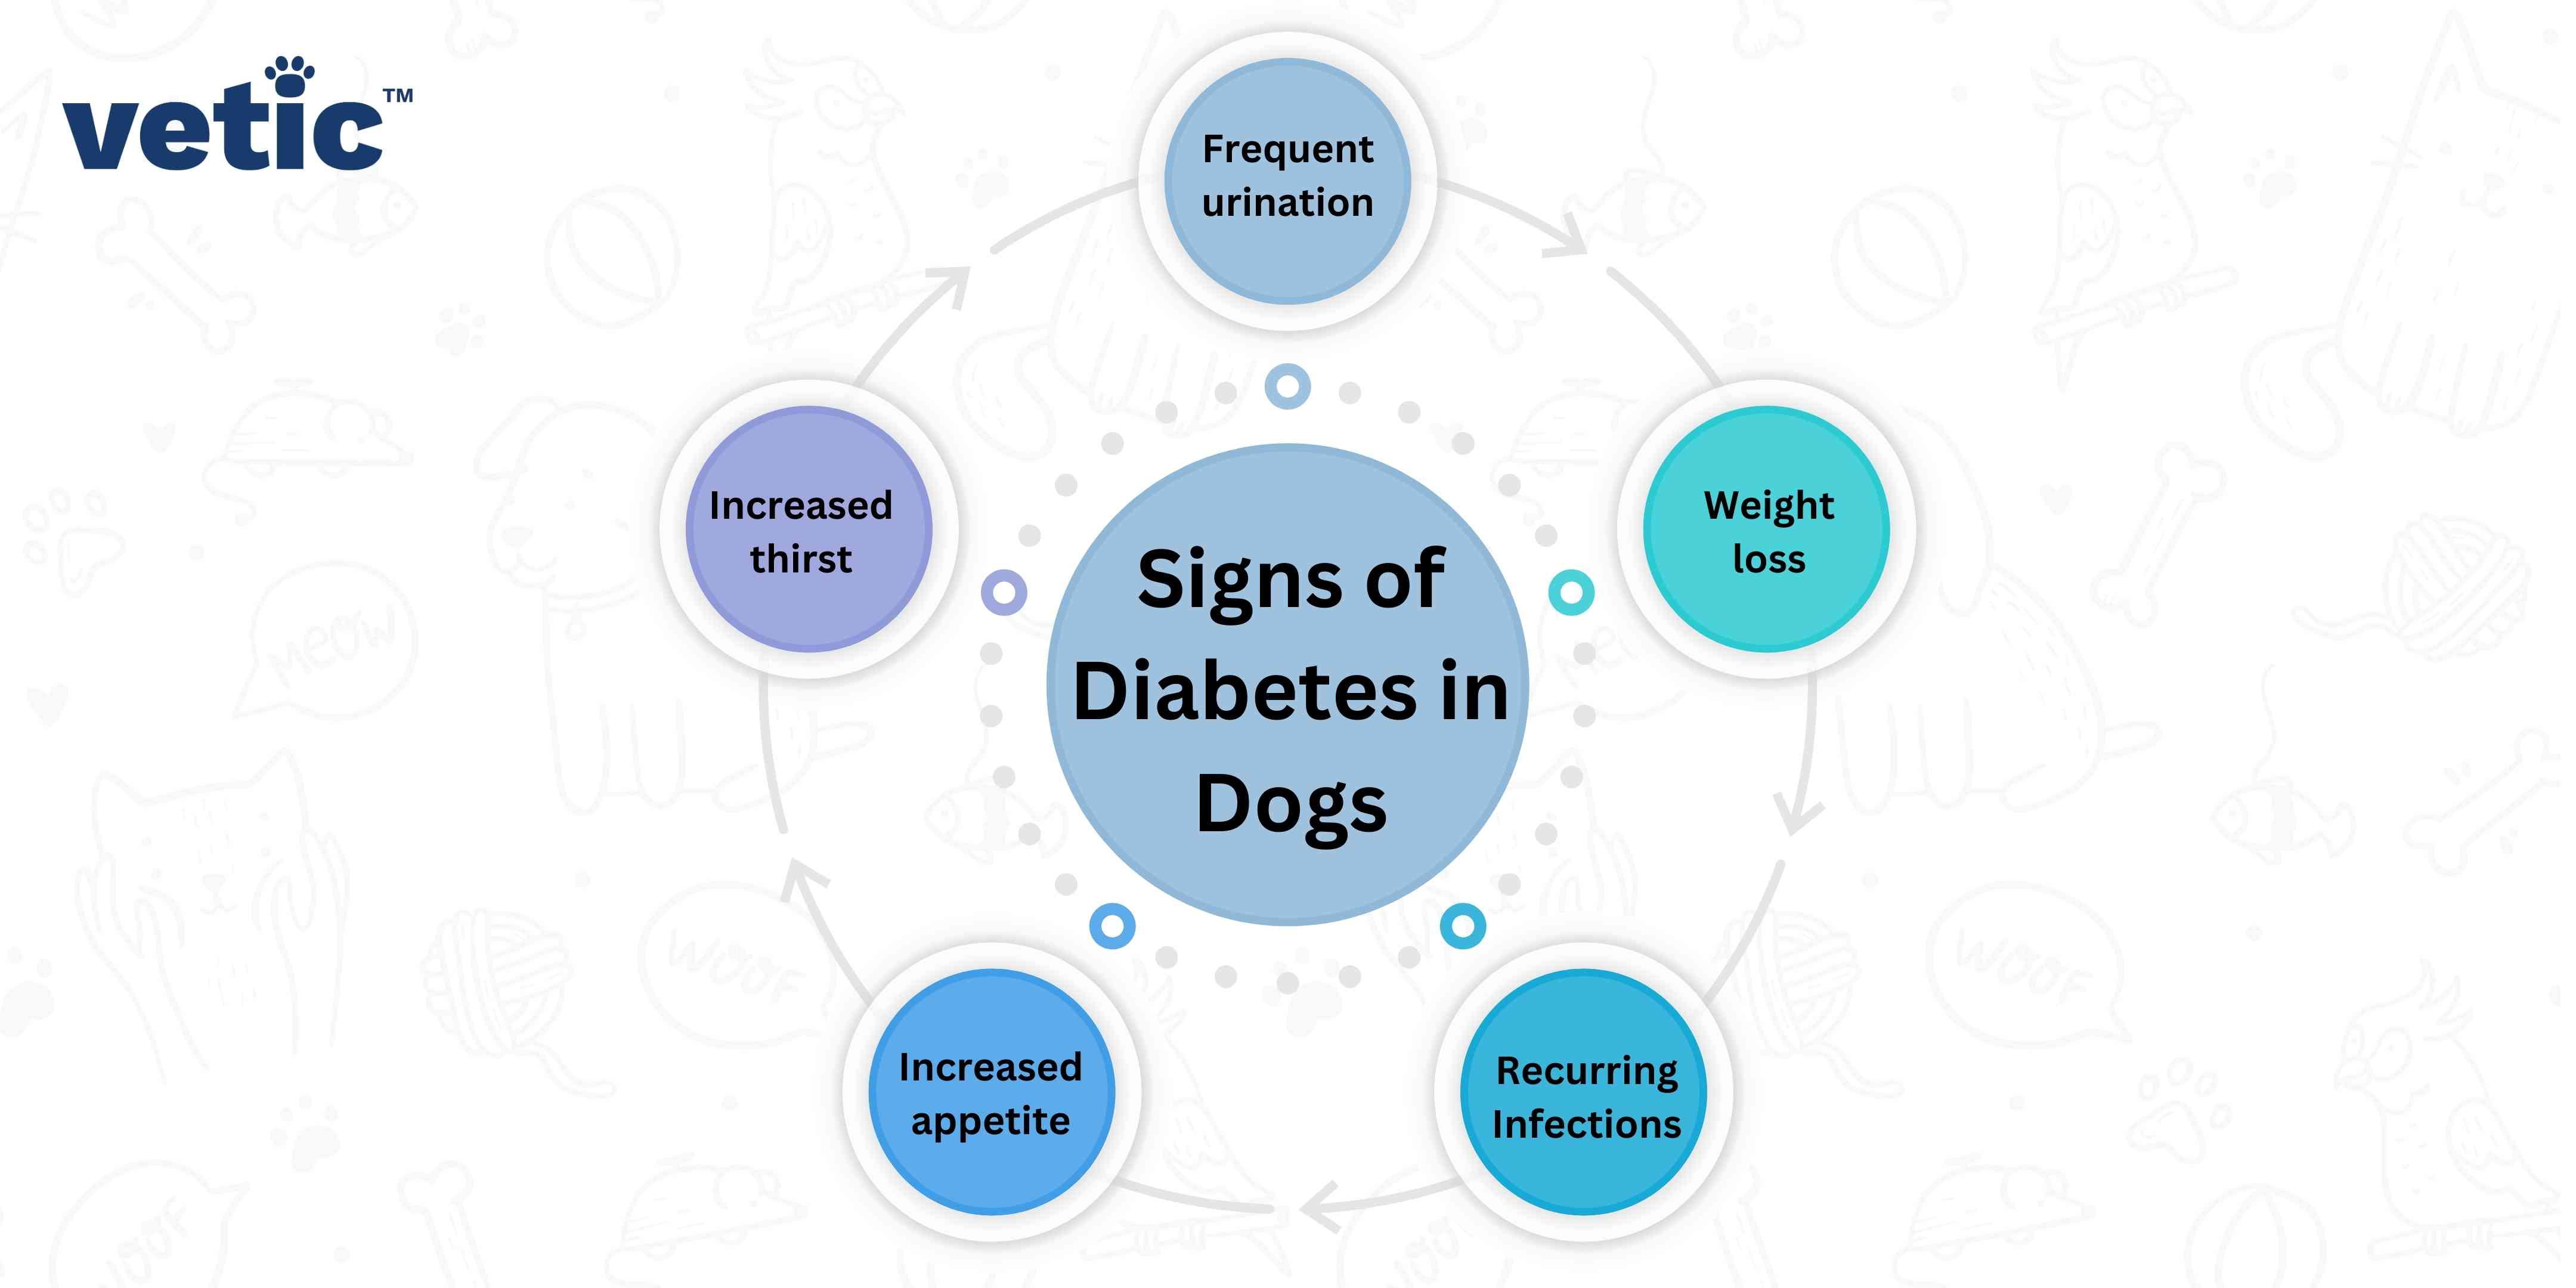 The image is an informative diagram that outlines the signs of diabetes in dogs. It features a central circle containing the main title, surrounded by six smaller circles, each listing a different symptom of diabetes in dogs. It can cause various symptoms such as frequent urination, weight loss, recurring infections, increased appetite, and increased thirst.